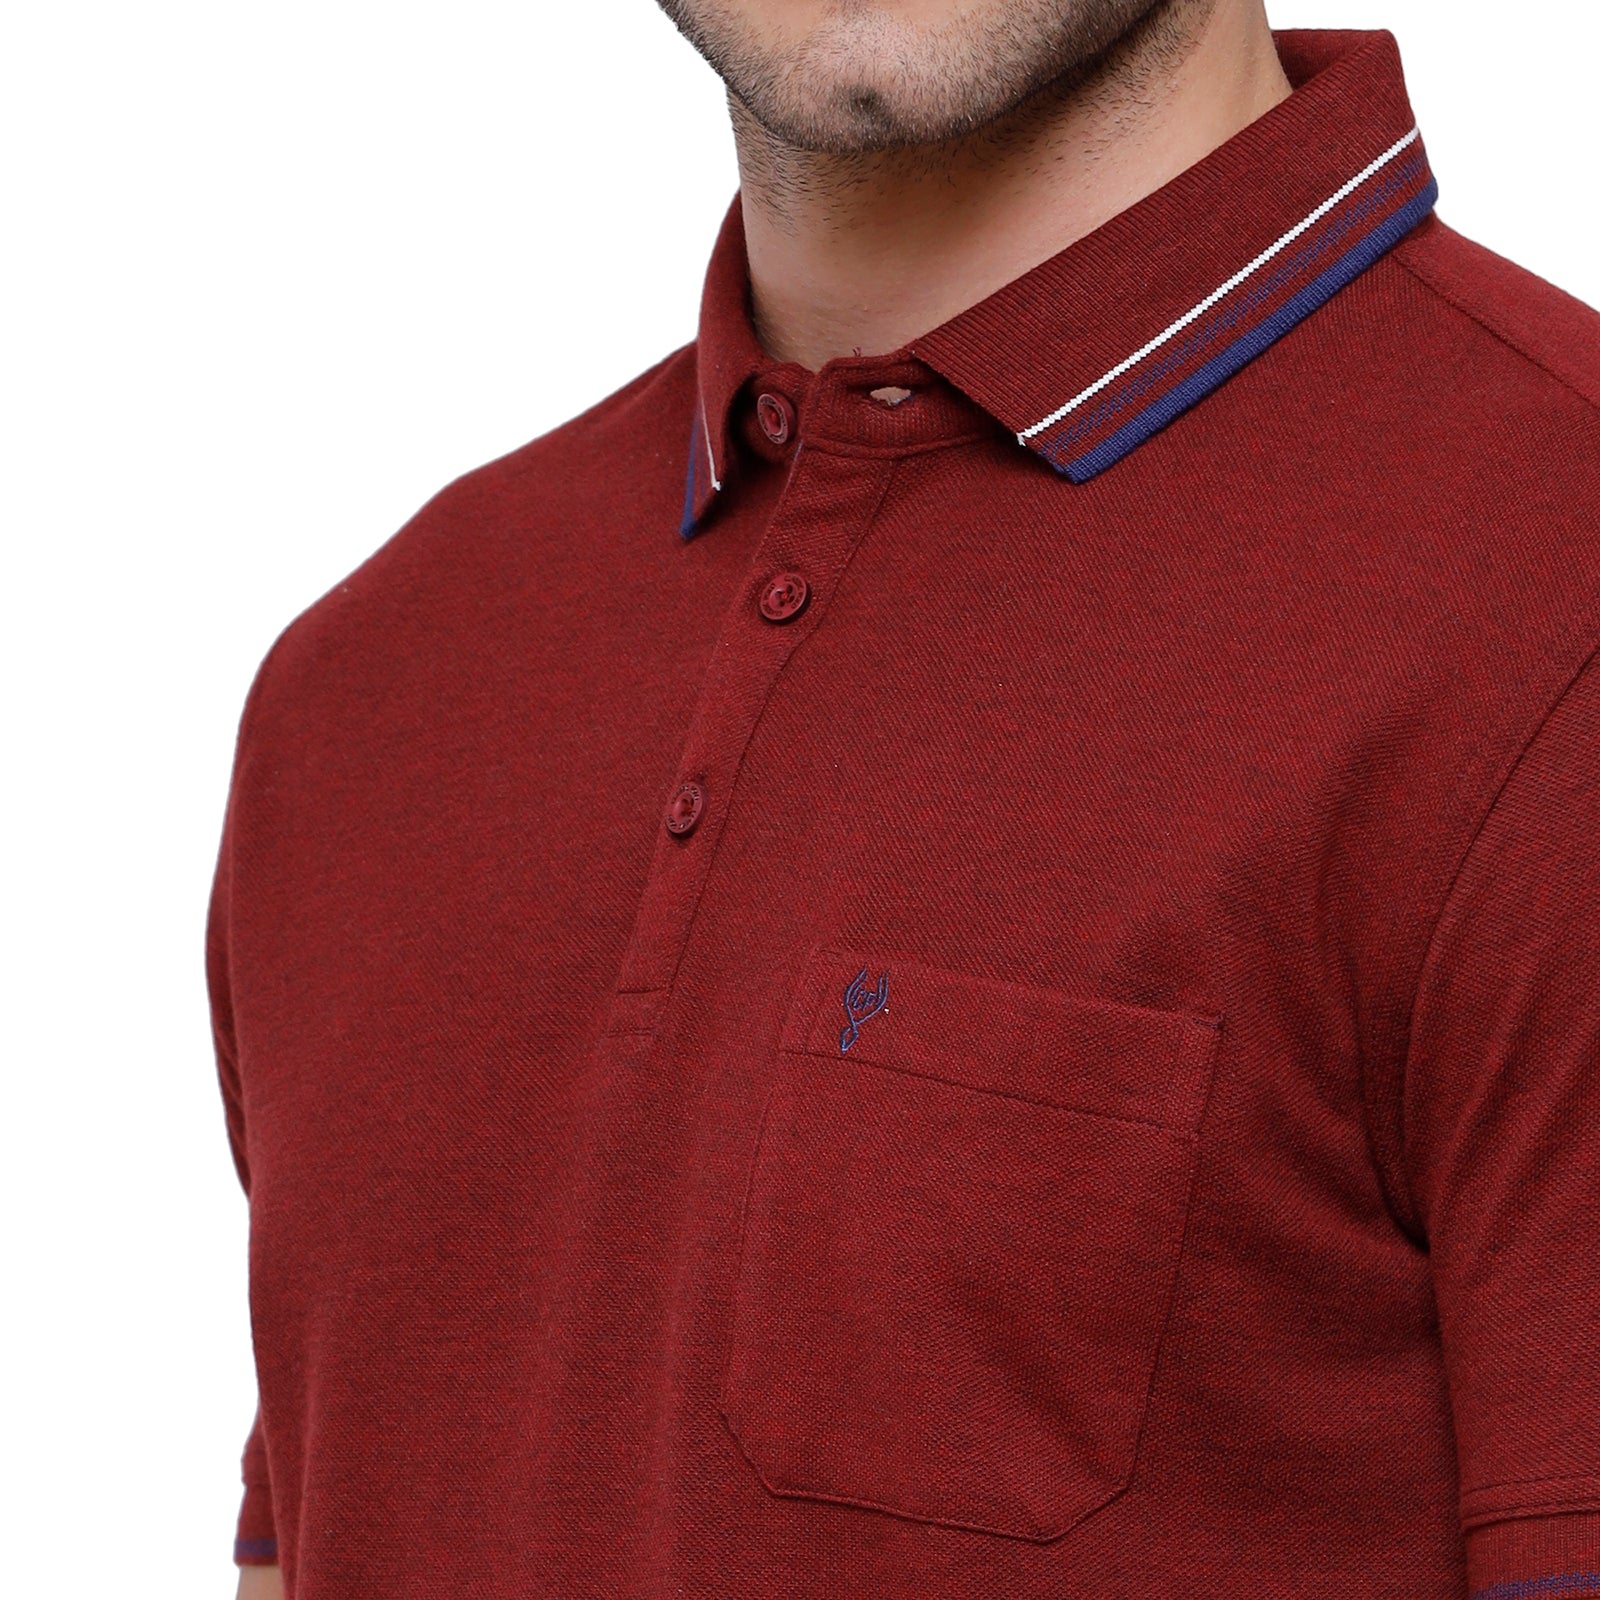 Classic polo Men's Maroon Red Melange Polo Half Sleeve Slim Fit T-Shirt - Toza-Red Mel T-shirt Classic Polo 